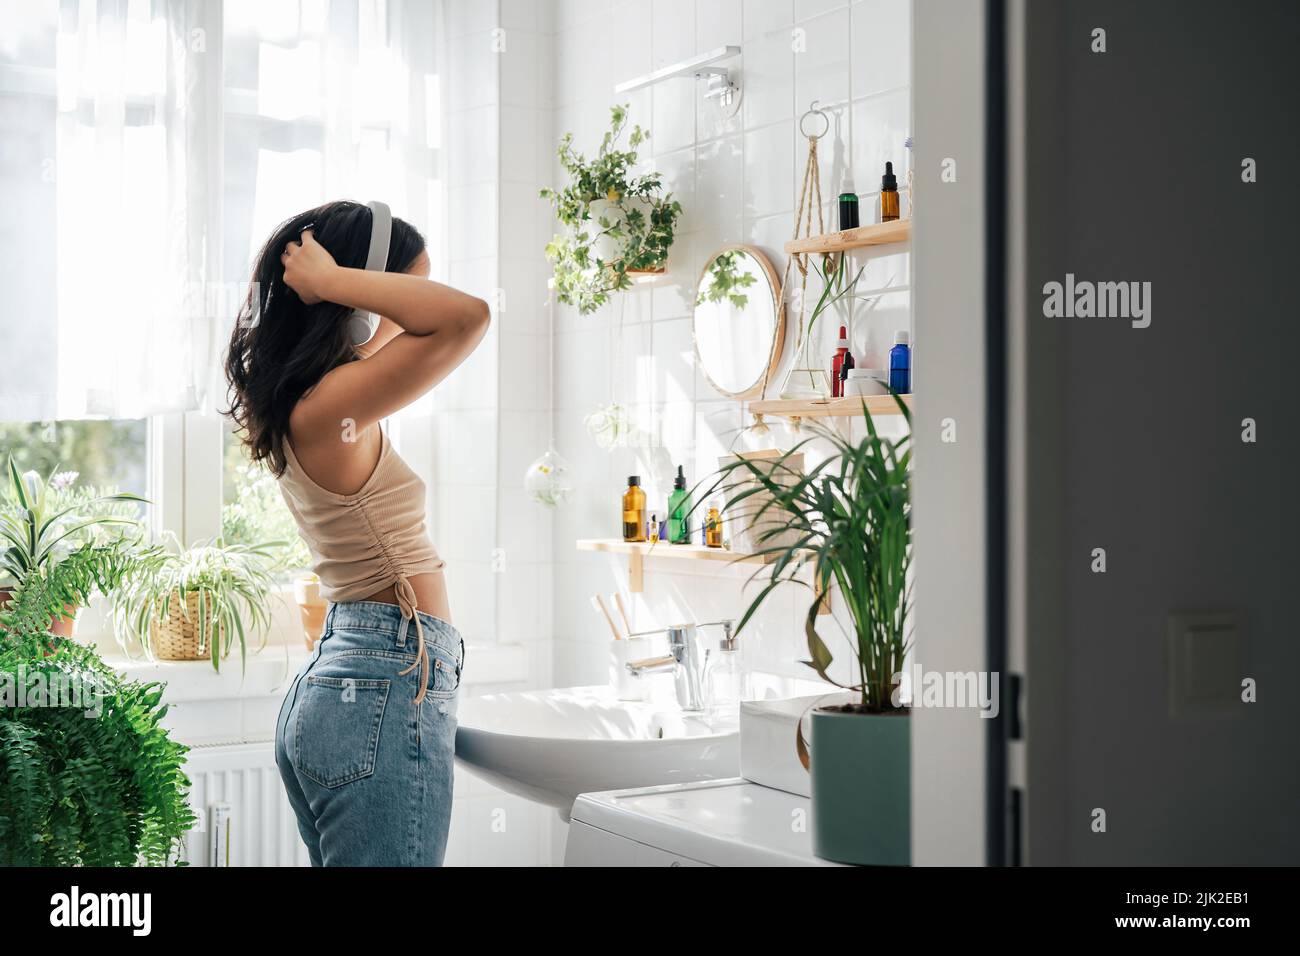 Young hispanic woman dancing with headphones in bathroom. Body positivity, confort home zone, wellness and lifestyle Stock Photo